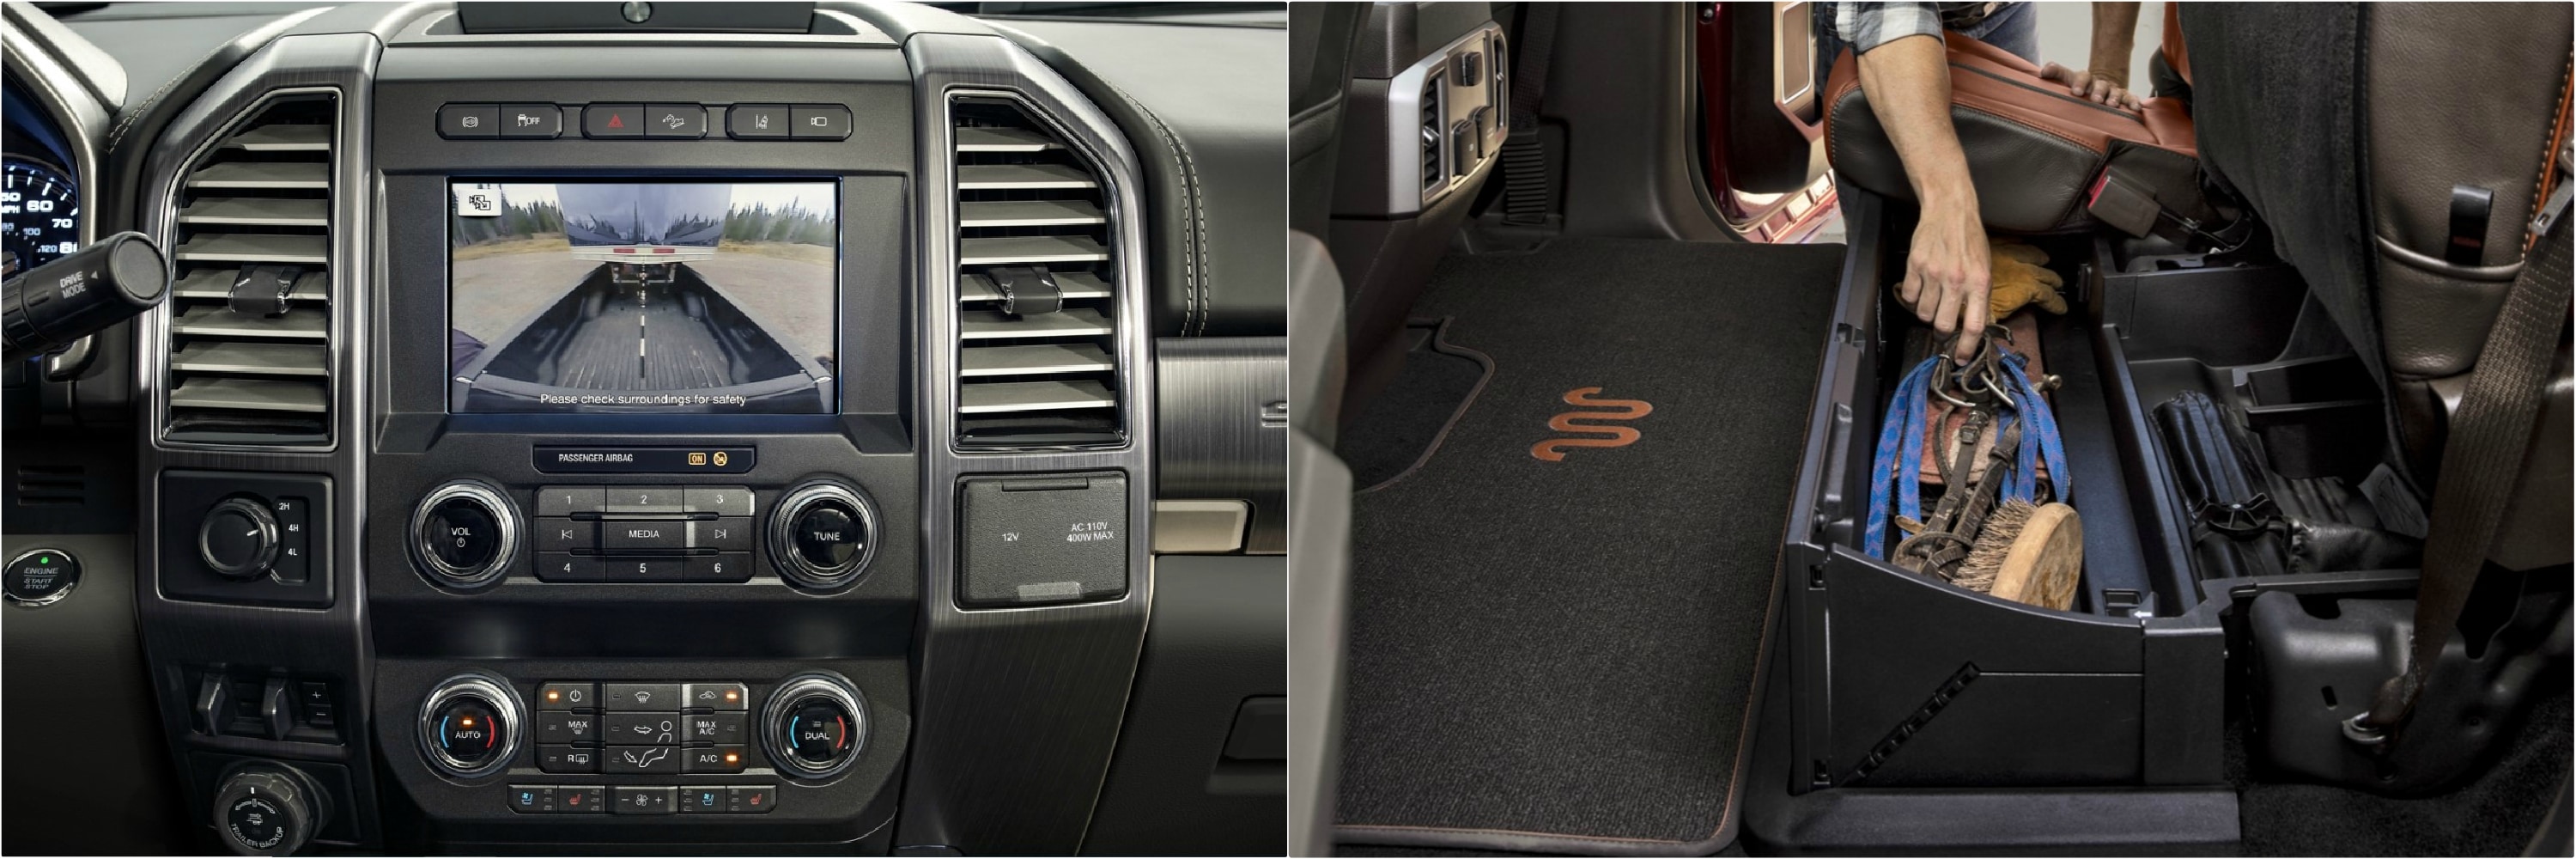 2021 and 2020 Ford Super Duty interior improvements